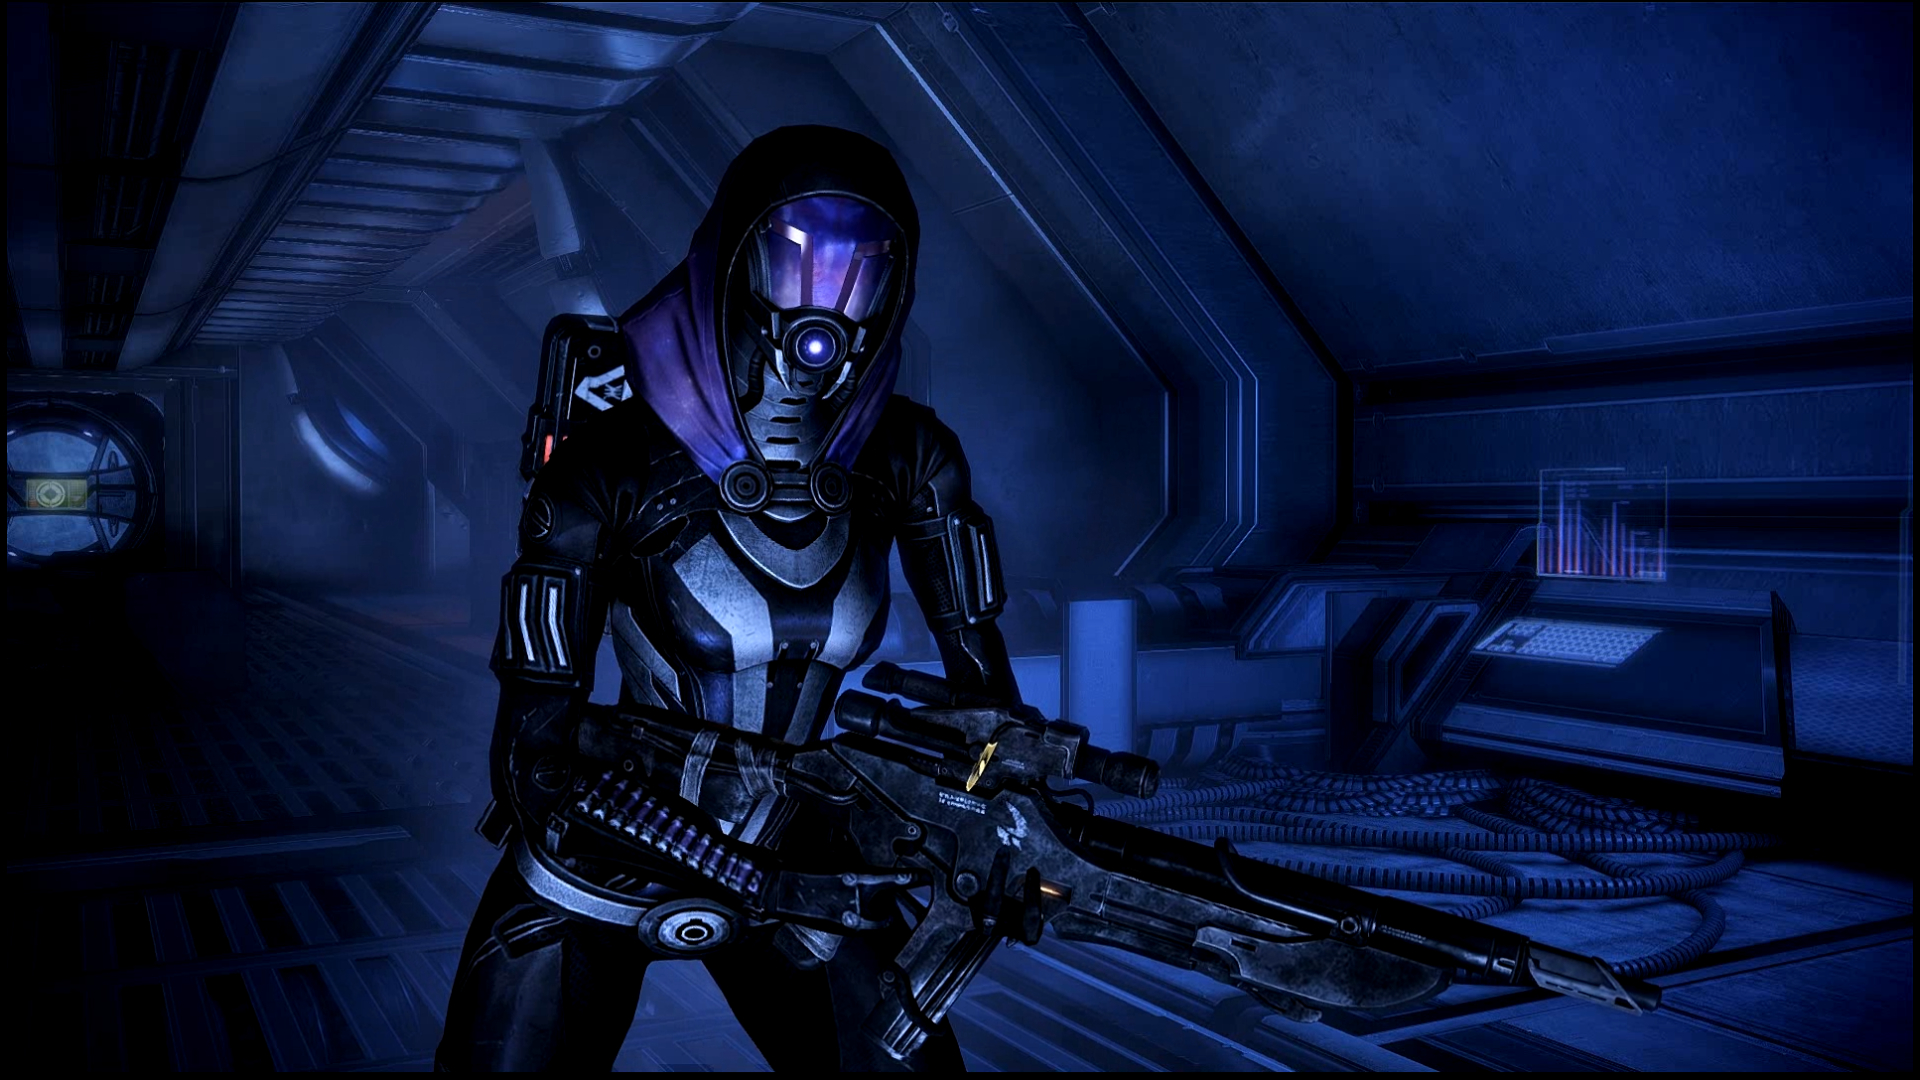 Free Download Mass Effect Tali Dreamscene By Droot On X For Your Desktop Mobile